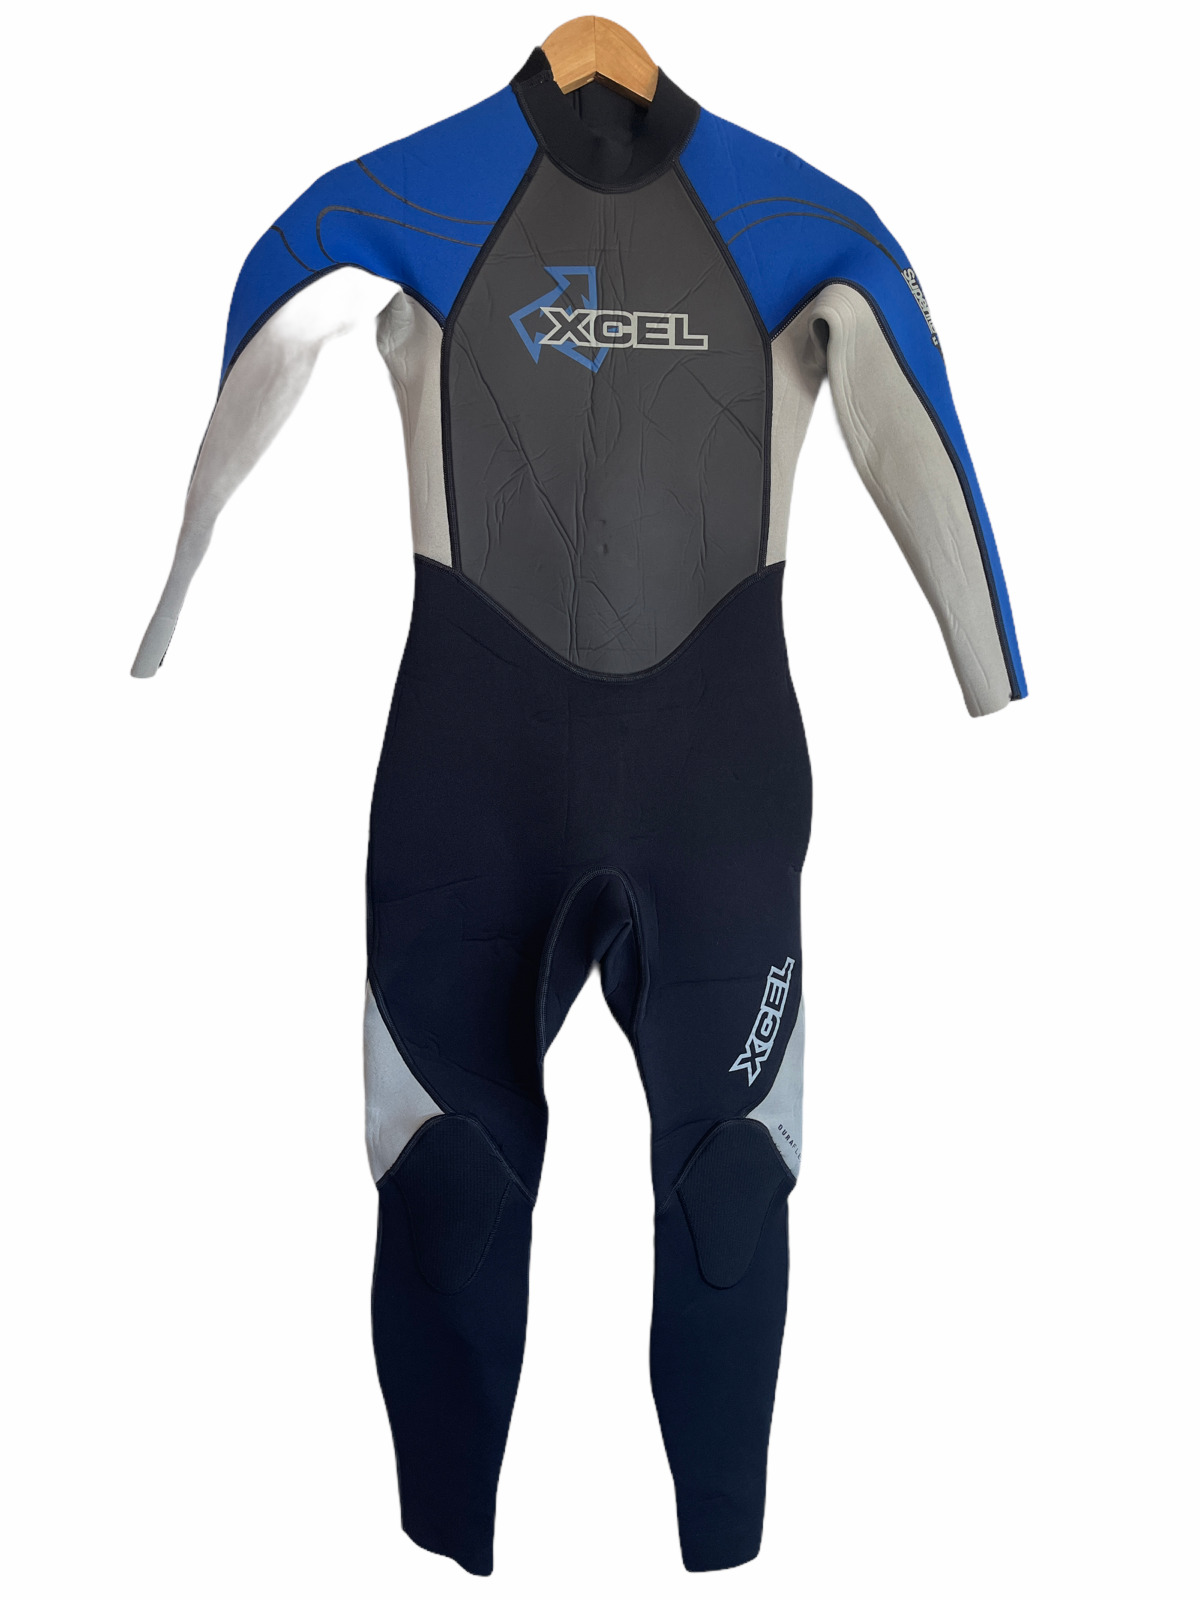 Xcel Childs Full Wetsuit Youth Kids Size 12 Superlite 3/2